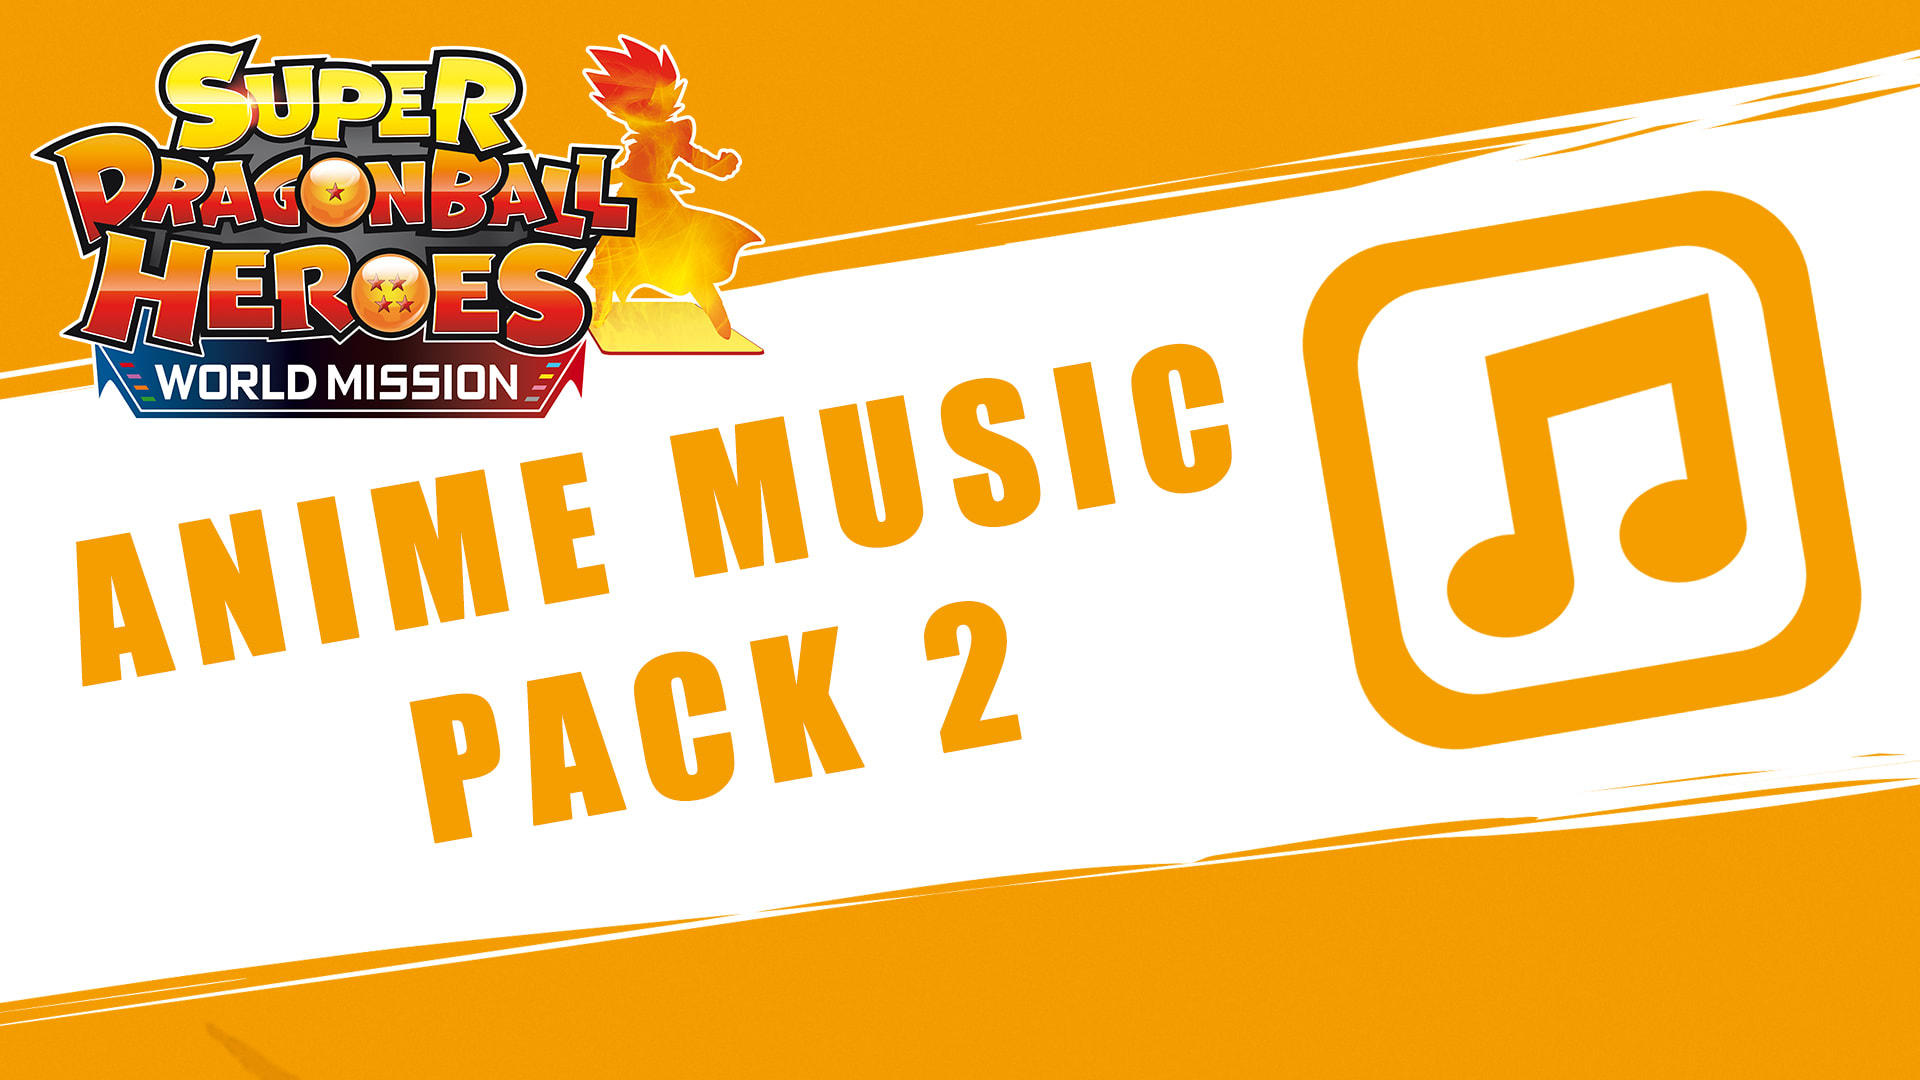 SUPER DRAGON BALL HEROES WORLD MISSION - Anime Music Pack 2